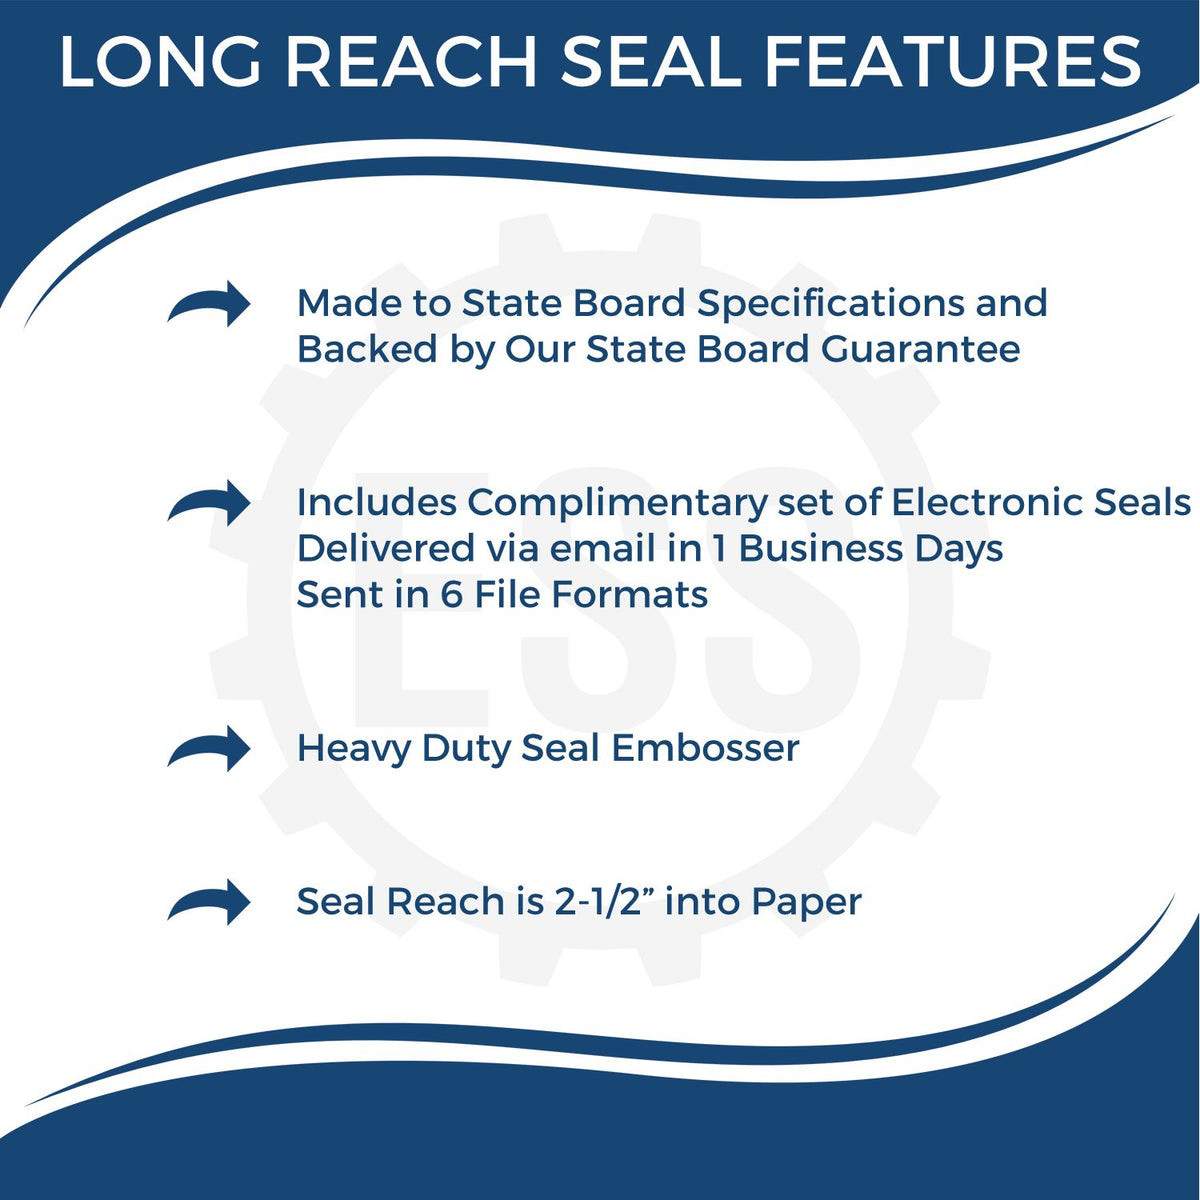 A picture of an infographic highlighting the selling points for the Long Reach North Dakota Geology Seal